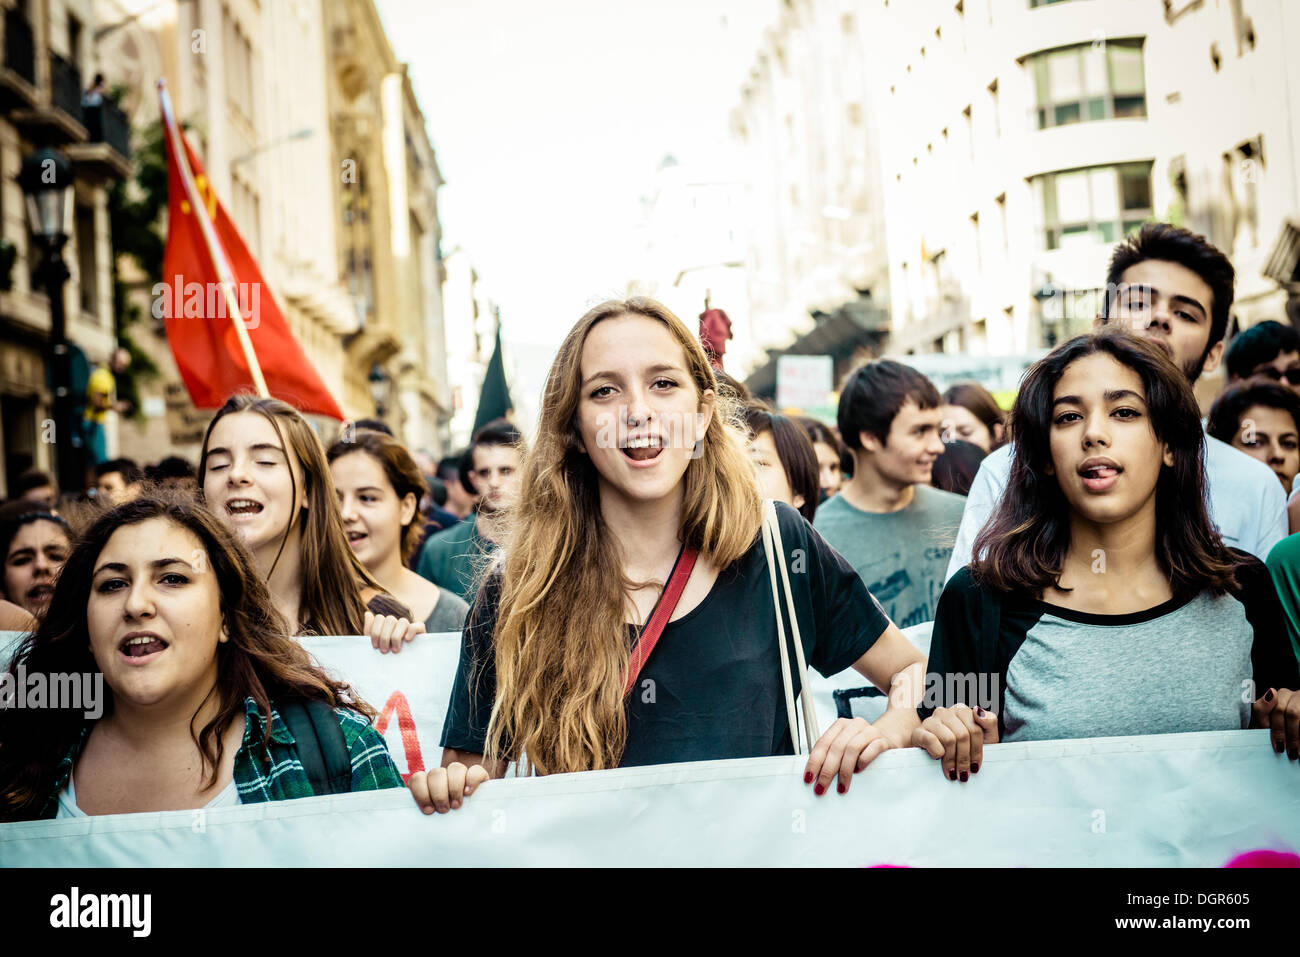 Barcelona, Spain. October 24th, 2013: Students behind their banner shout slogans to protest austerity measures and the 'law Wert' during a three day long education strike in Barcelona. © matthi/Alamy Live News Stock Photo